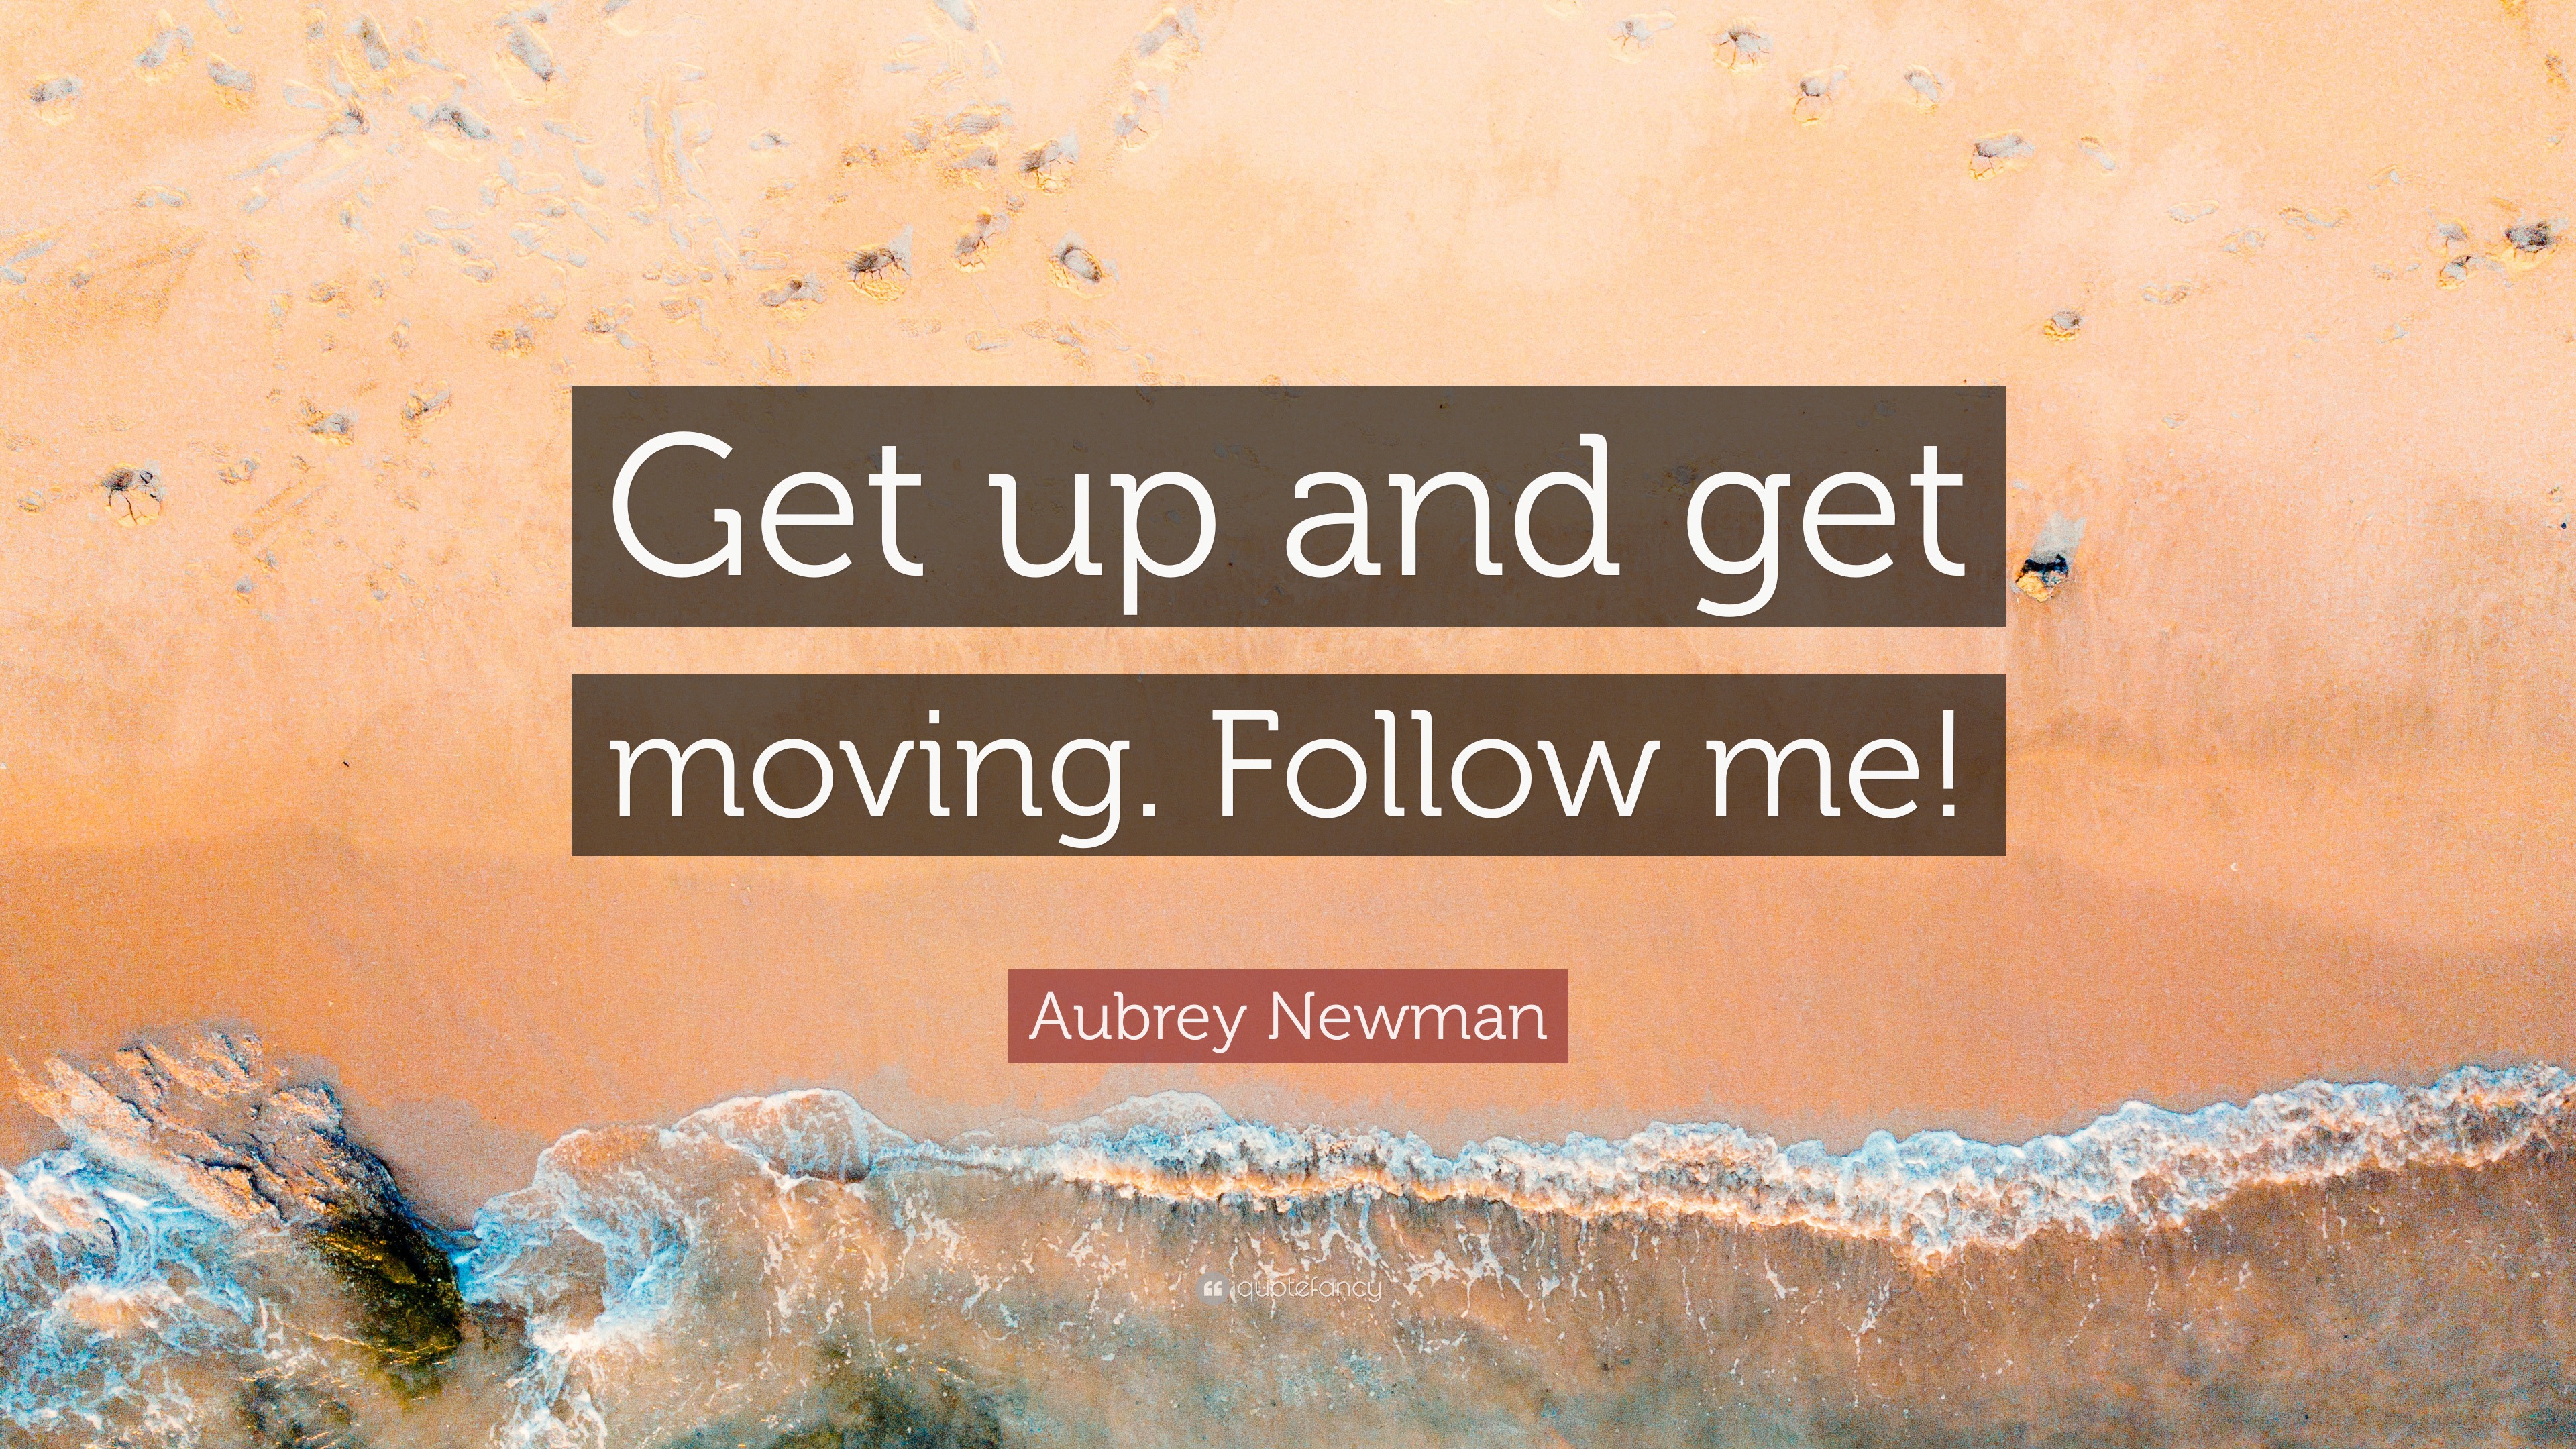 Aubrey Newman Quote: “Get up and get moving. Follow me!”